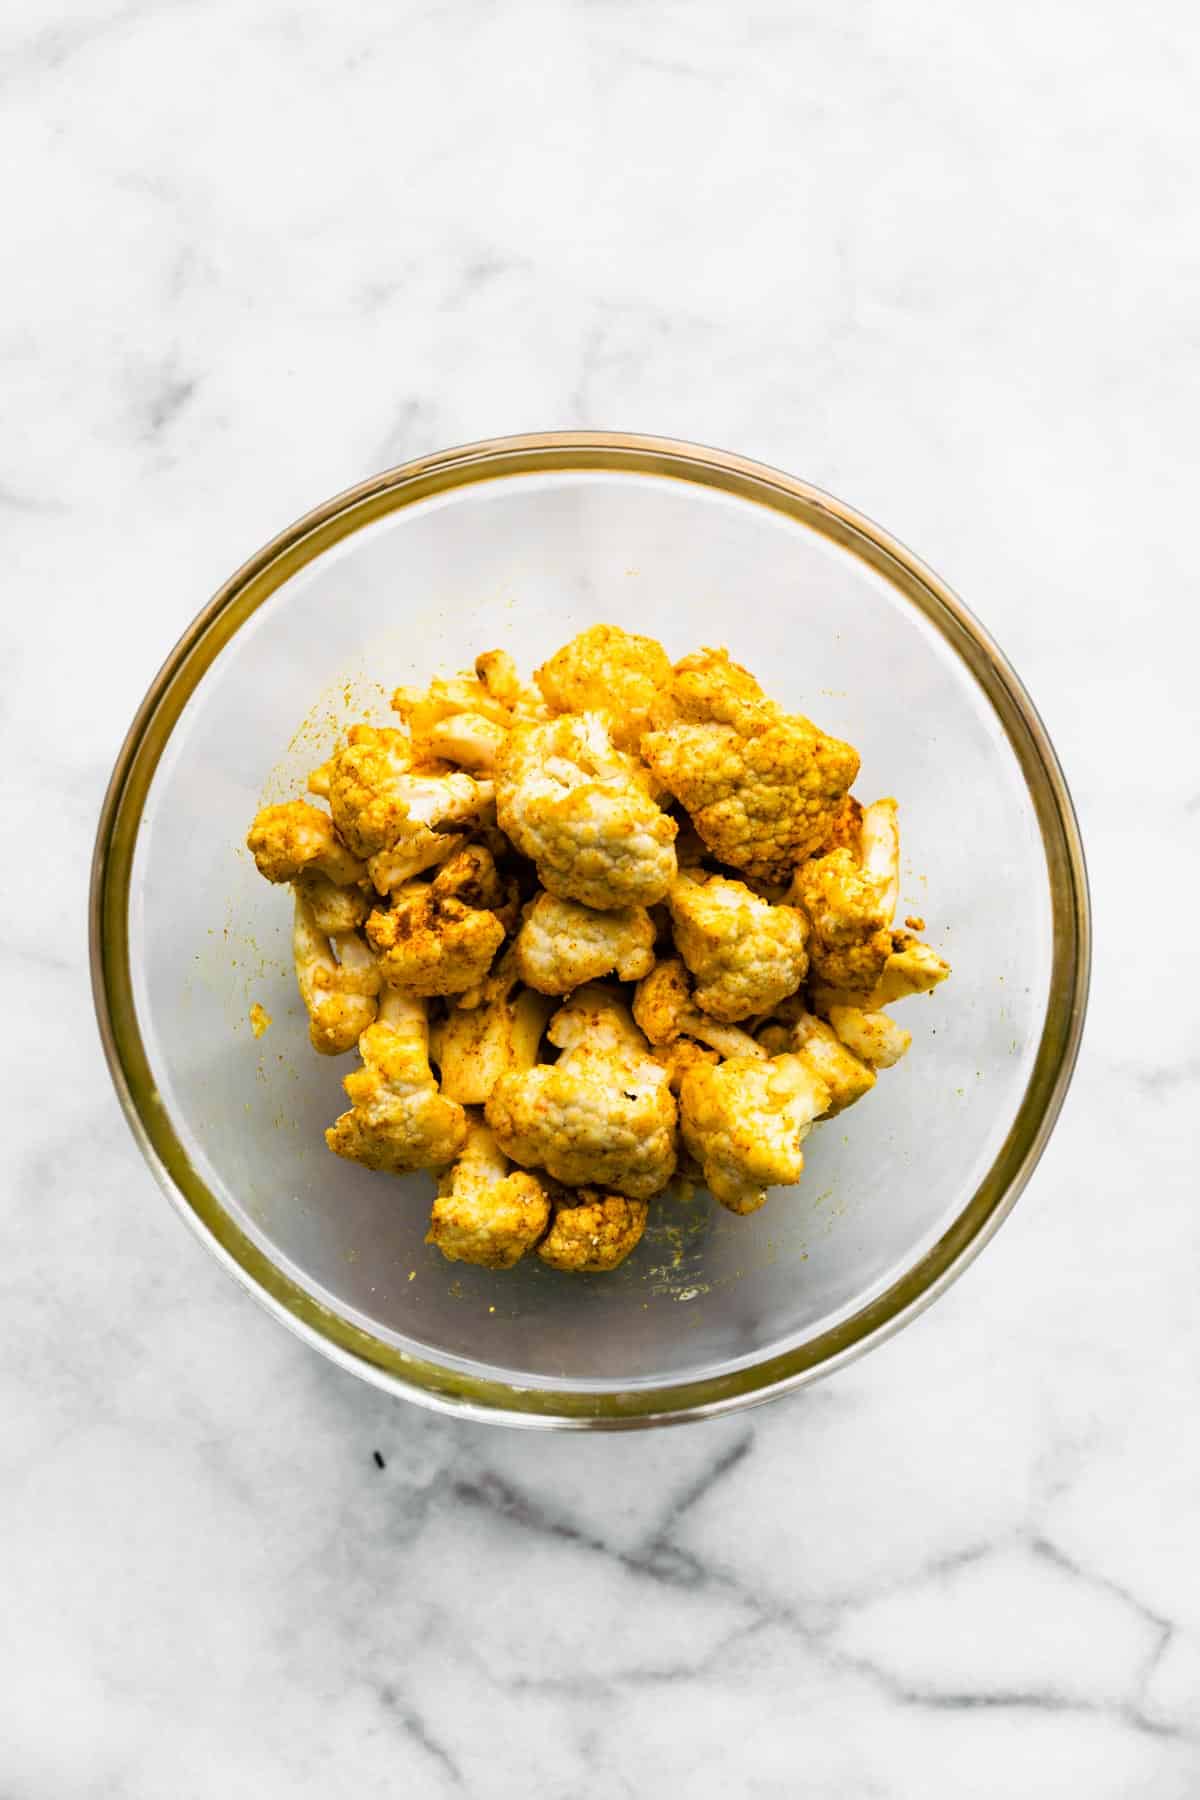 Cauliflower covered in spices in a bowl.